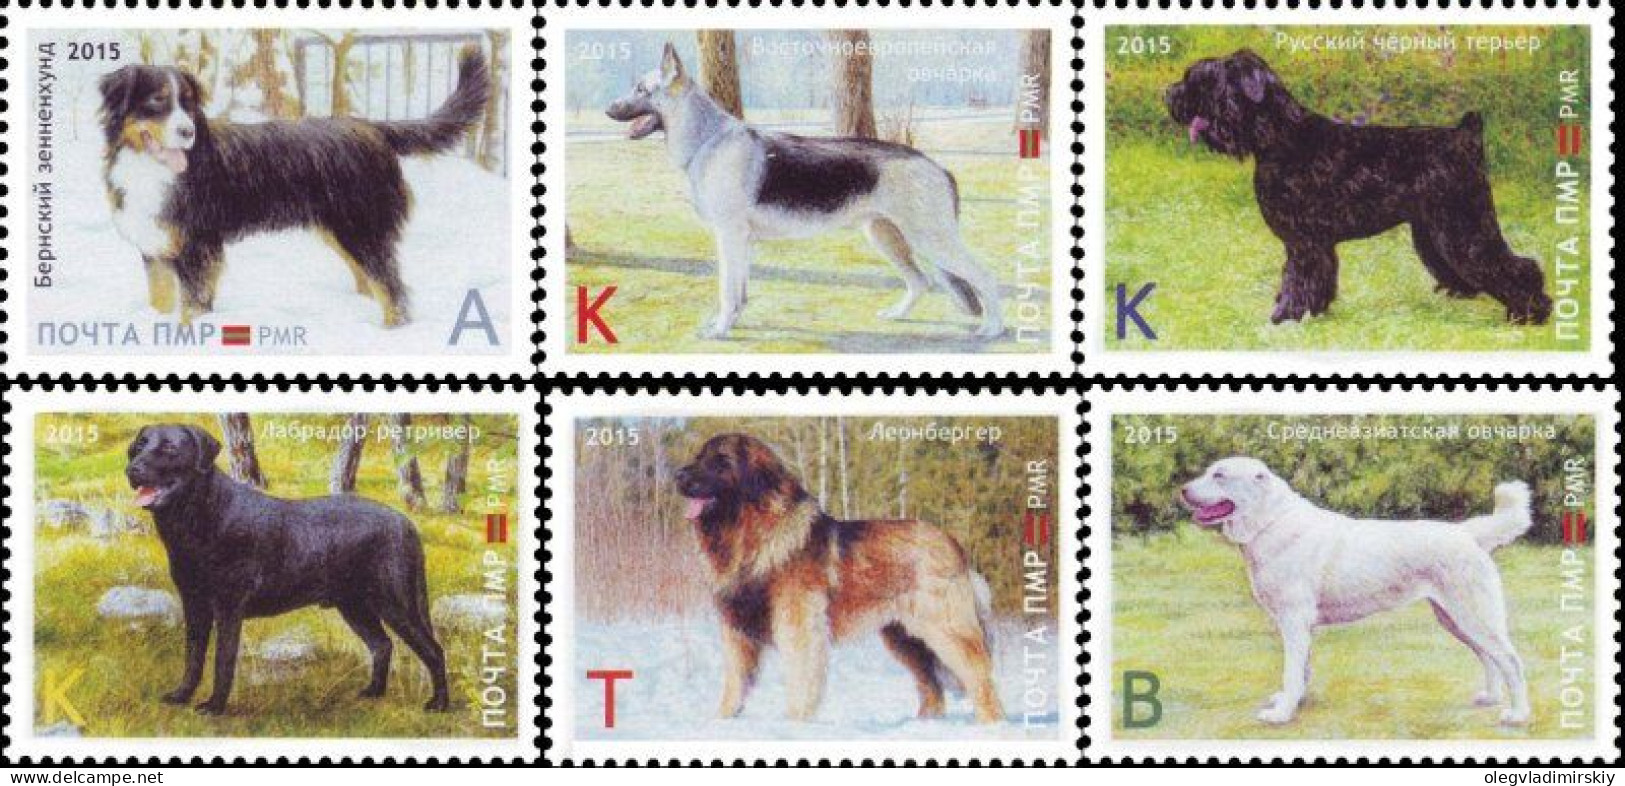 Russian Occupation Of Moldova (Transnistria DMR) 2016 Dog Breeds Set Of 6 Stamps Mint - Unclassified